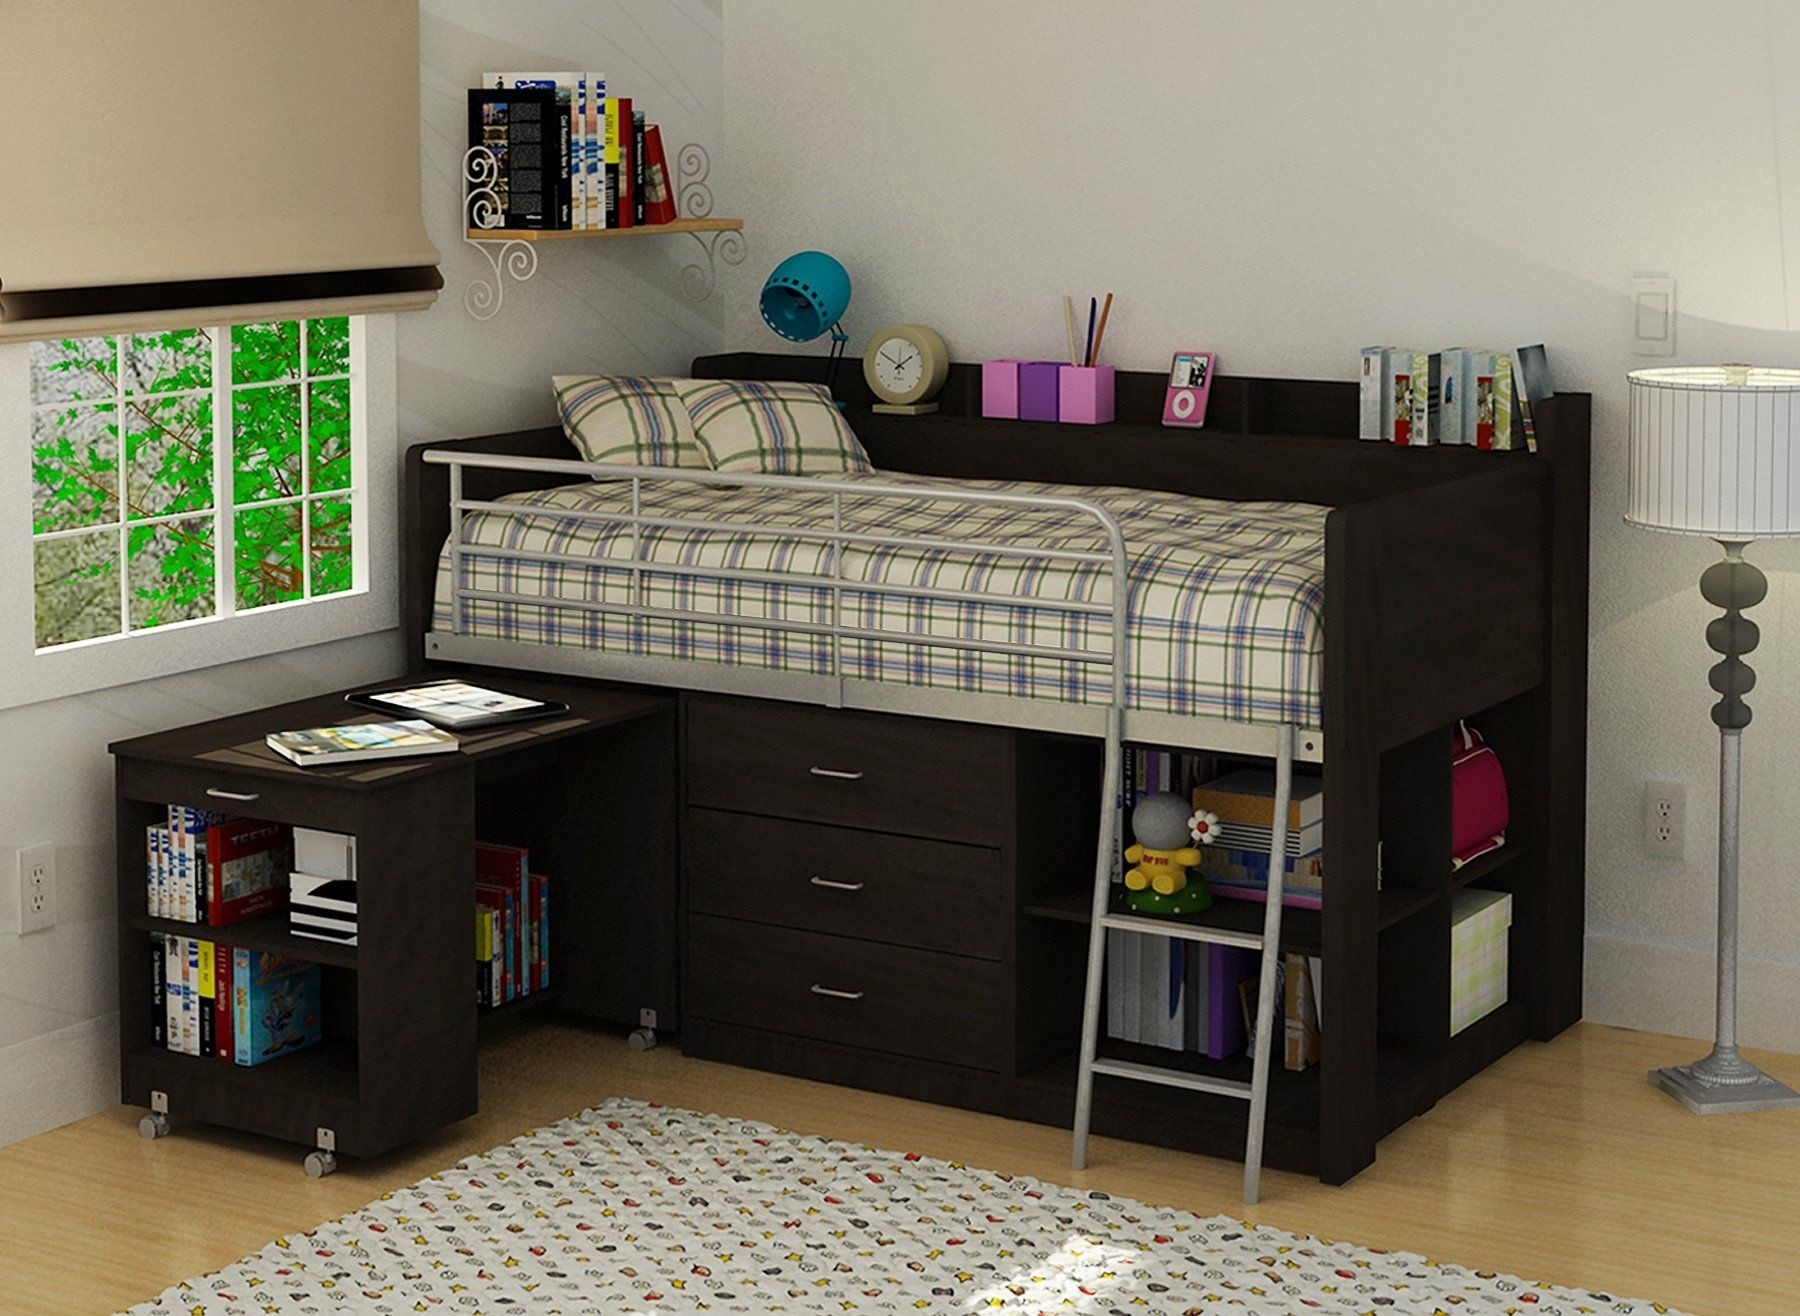 Loft bed with desk and bookshelf